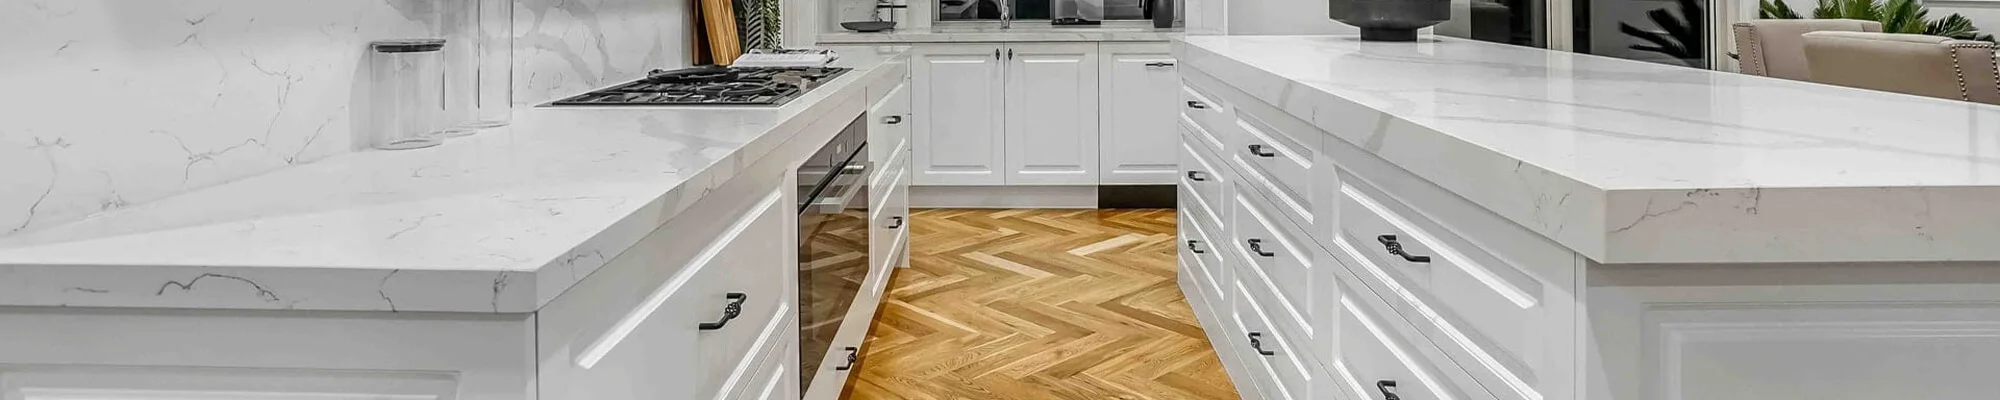 Beautiful hardwood flooring in modern white kitchen provided by Johnson & Sons Flooring in the Knoxville, TN area